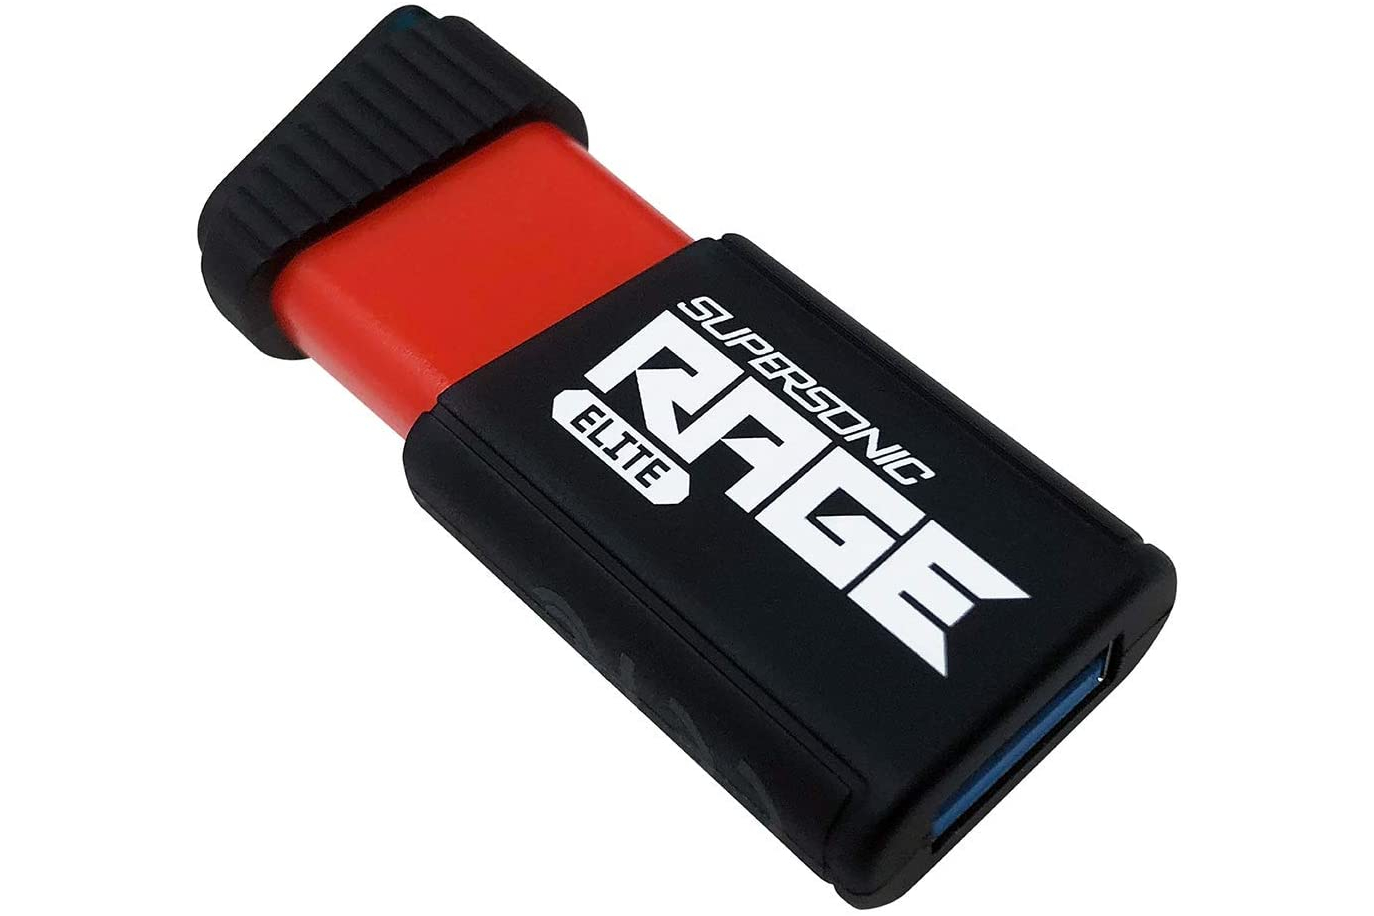 The Largest Capacity Flash Drives Currently Available